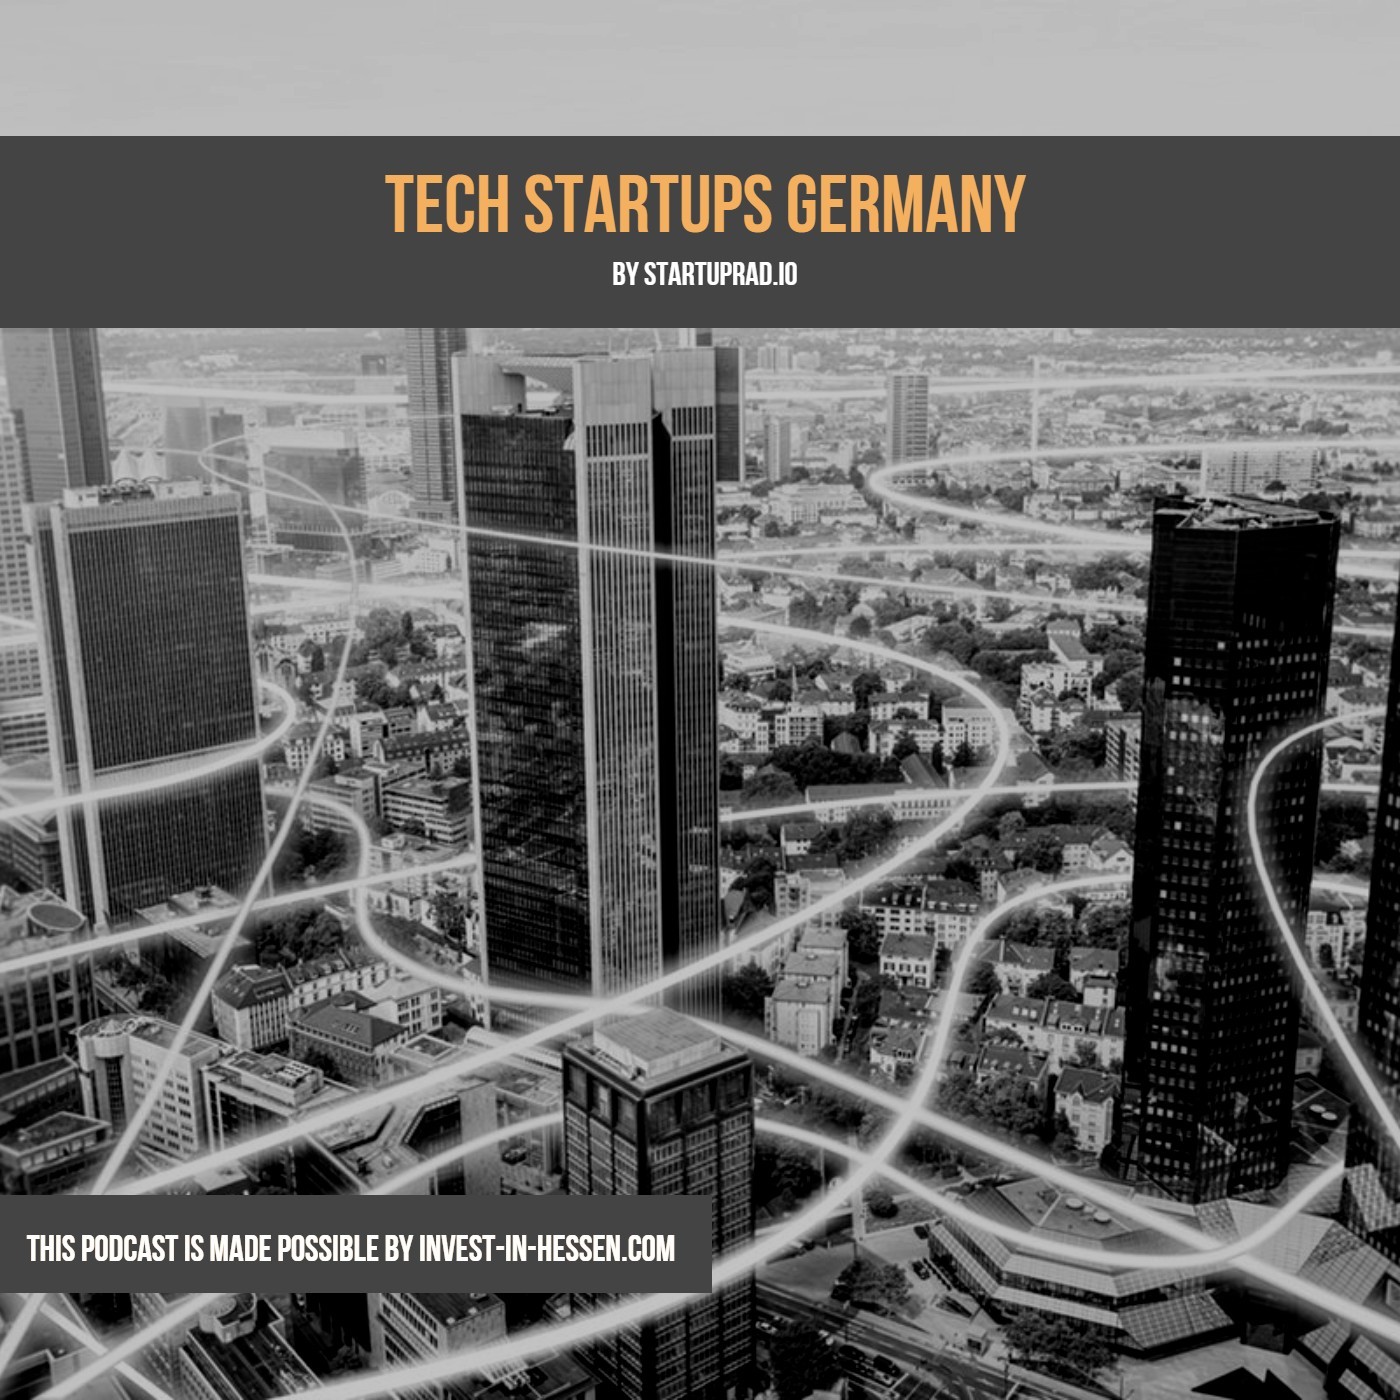 Meet the Fintech Behind the 100 mn € Exit Nobody Talks About